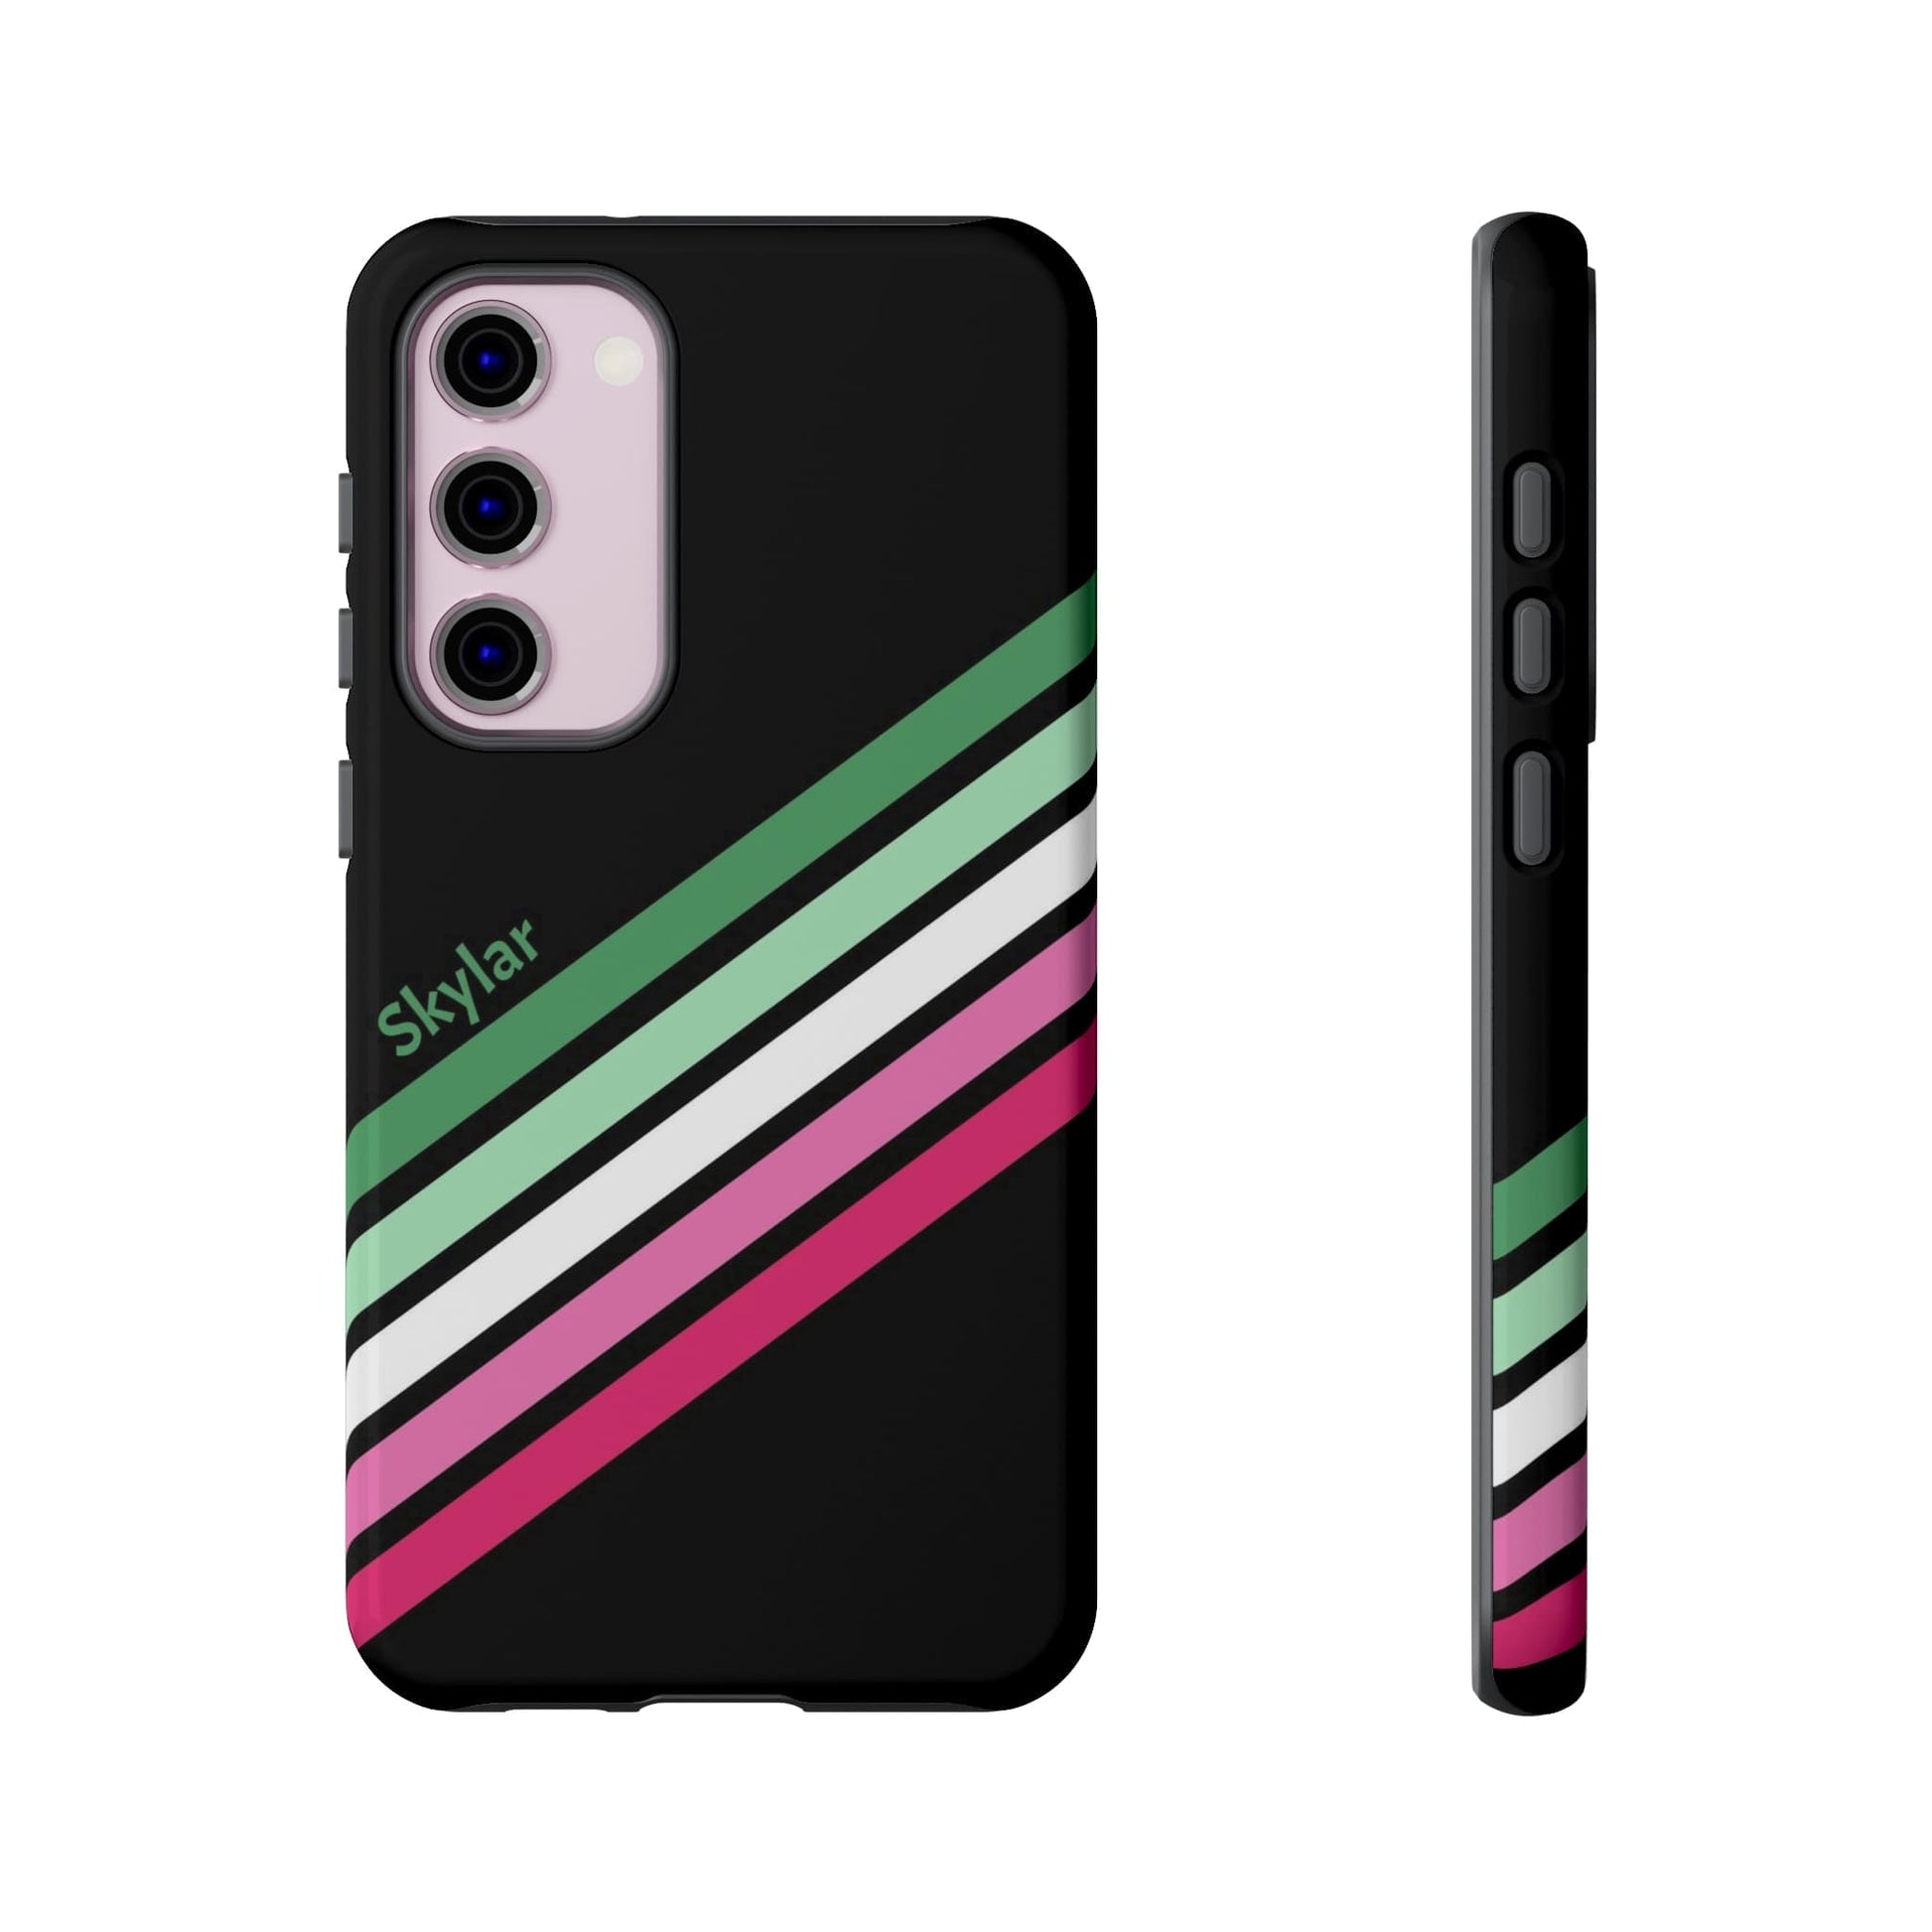 abrosexual phone case personalized, front